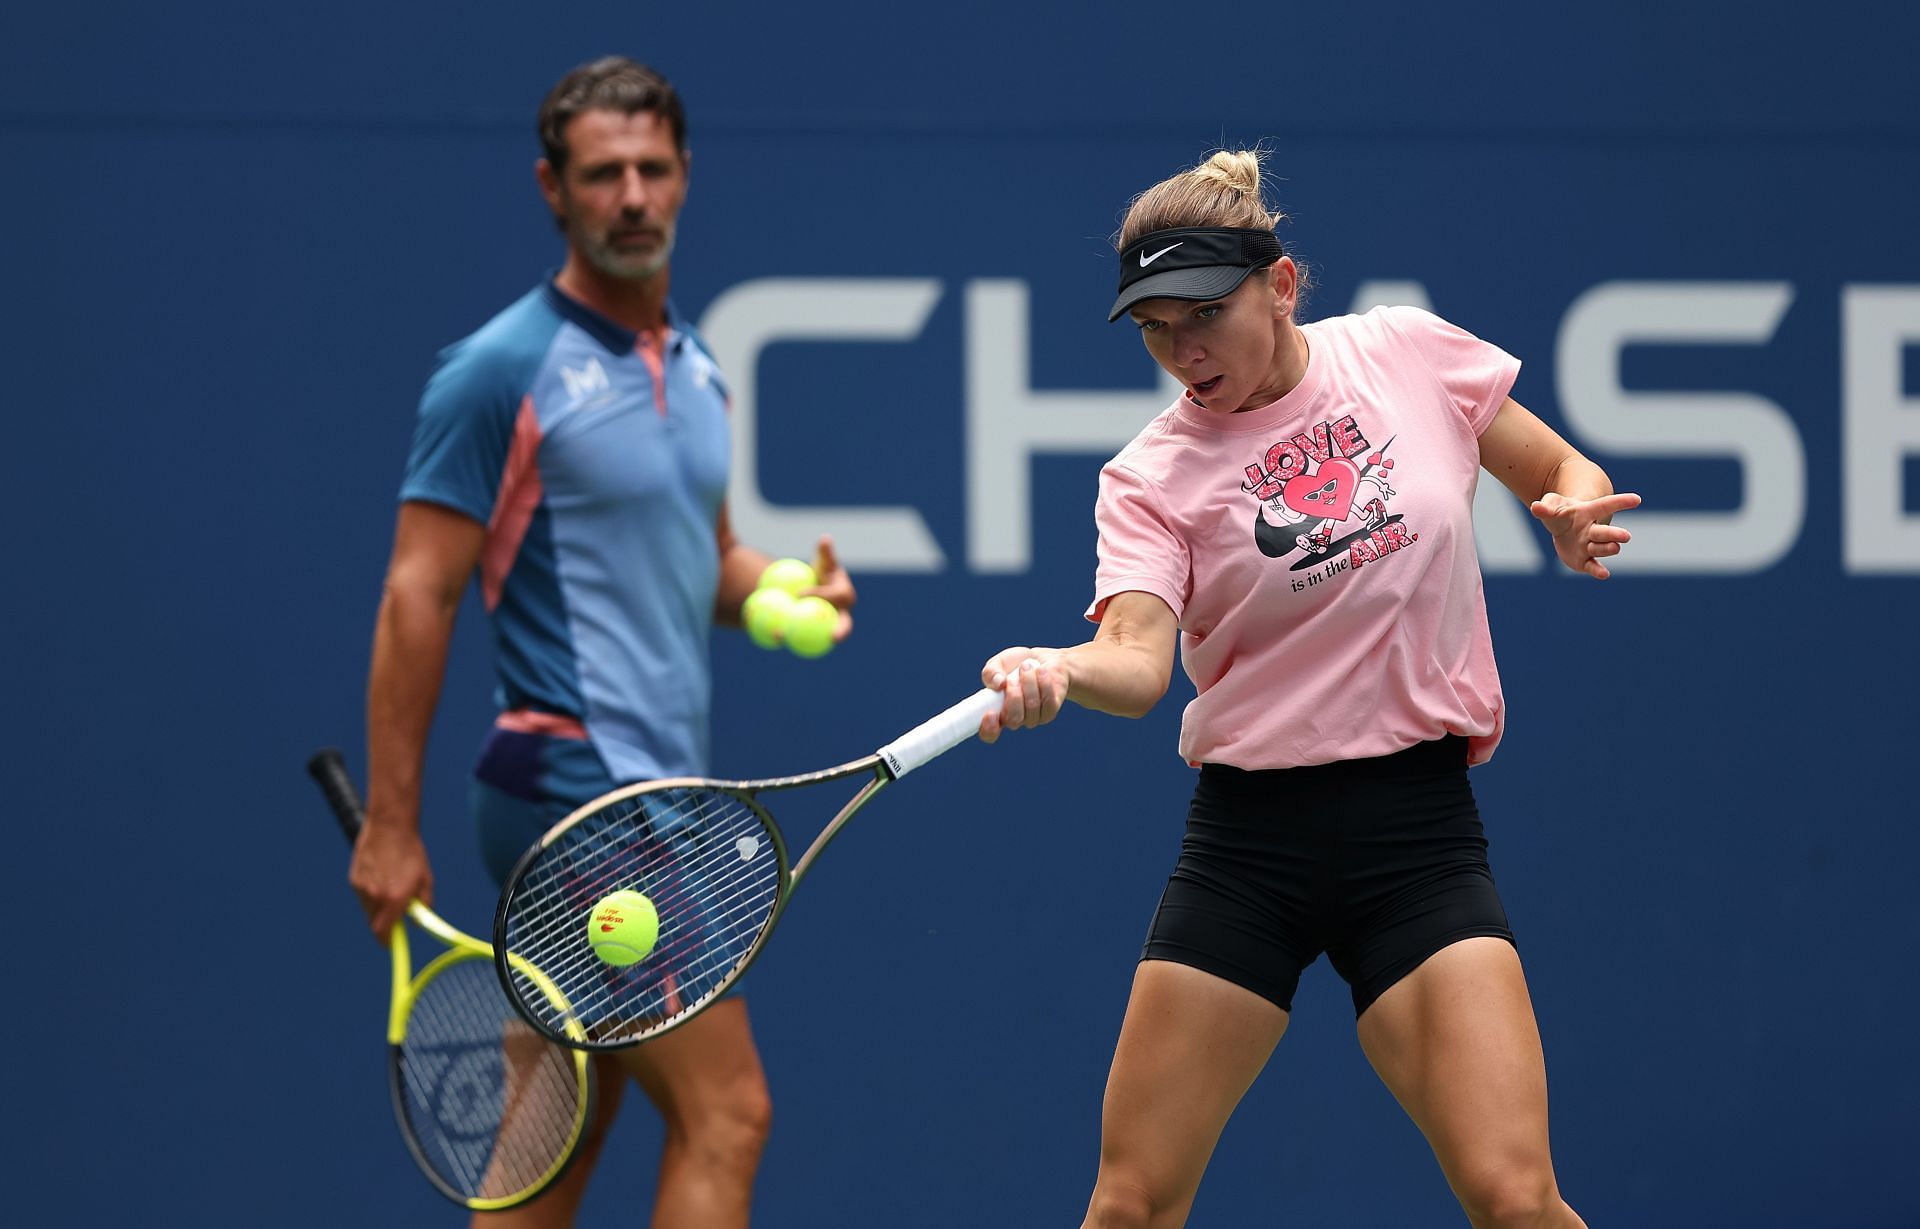 Patrick Mouratoglou with Simona Halep at a practice session during the US Open 2022